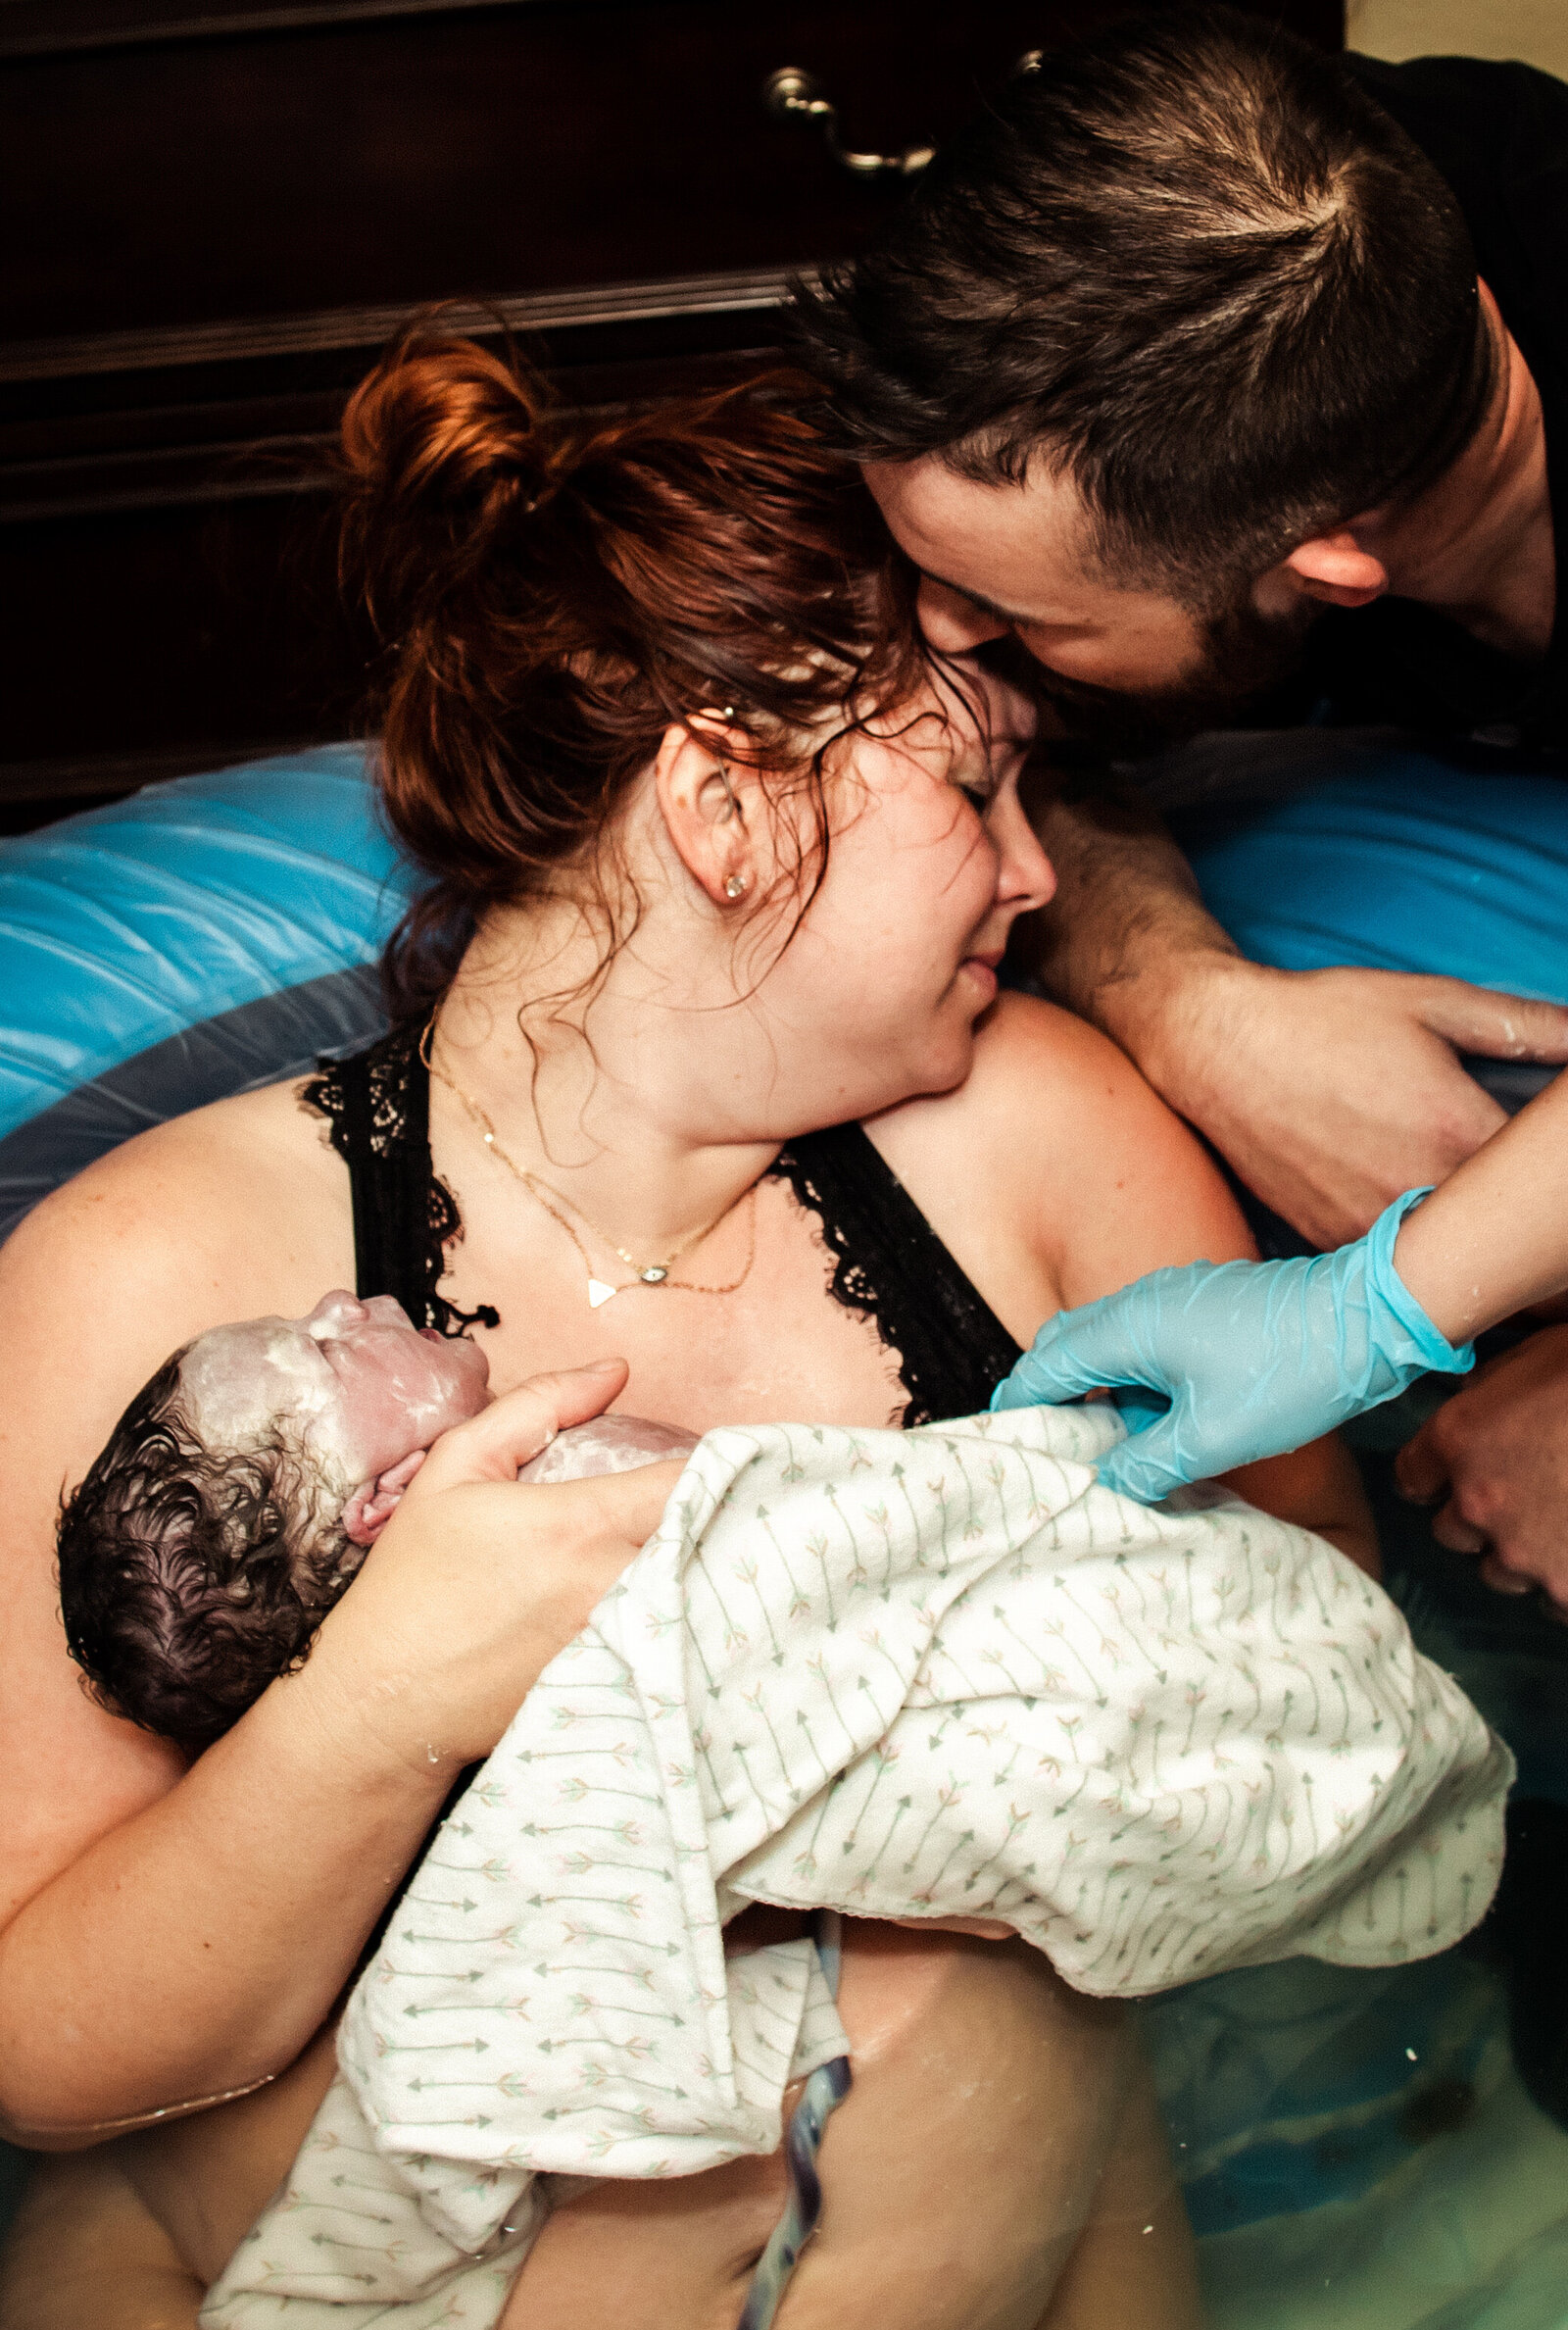 Dad kissing moms forehead and she embraces their new baby in the birth tub